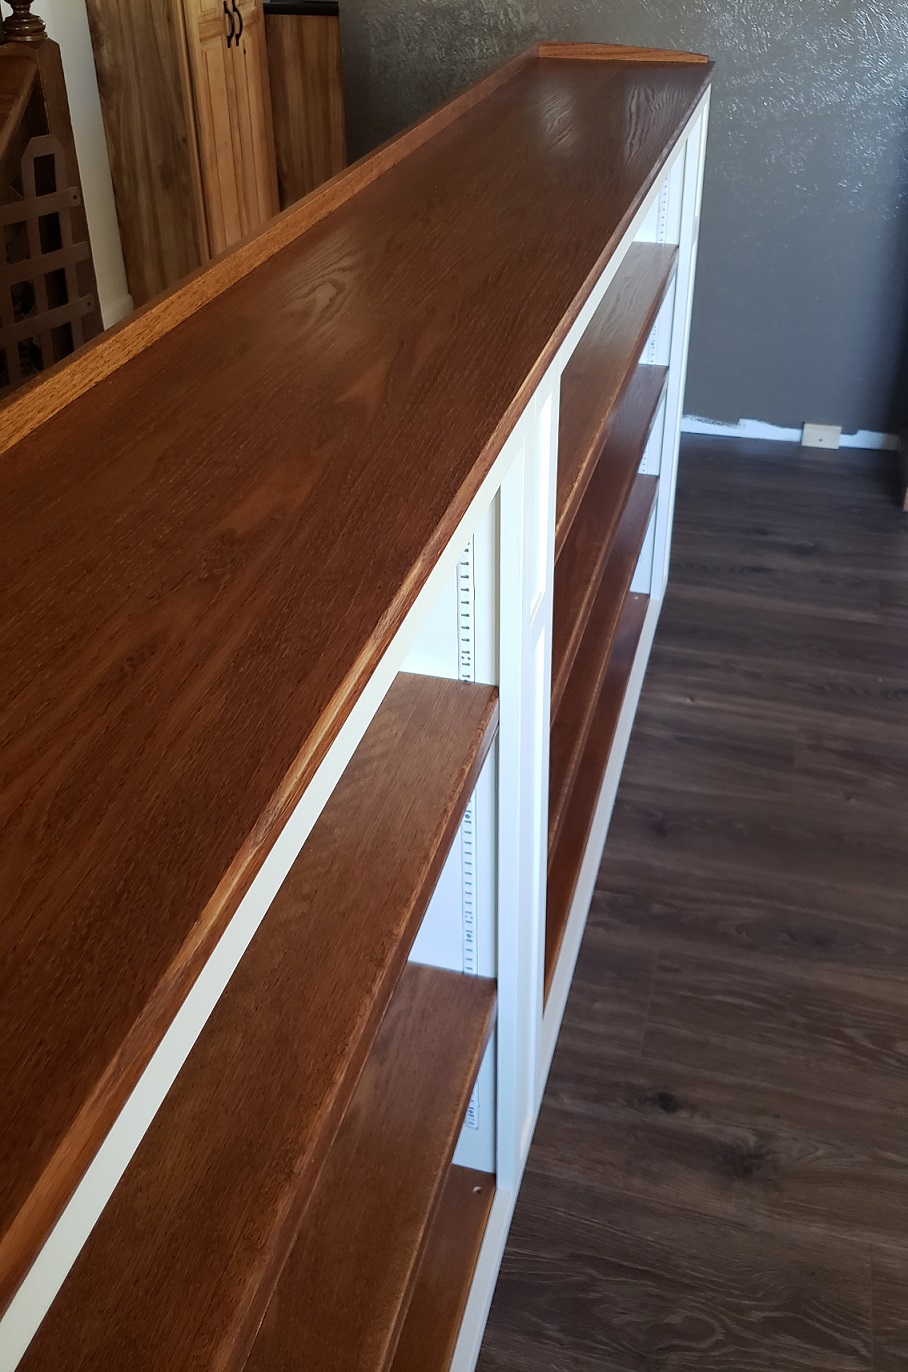 Long stained oak top on white built in bookshelf in front of brown wall